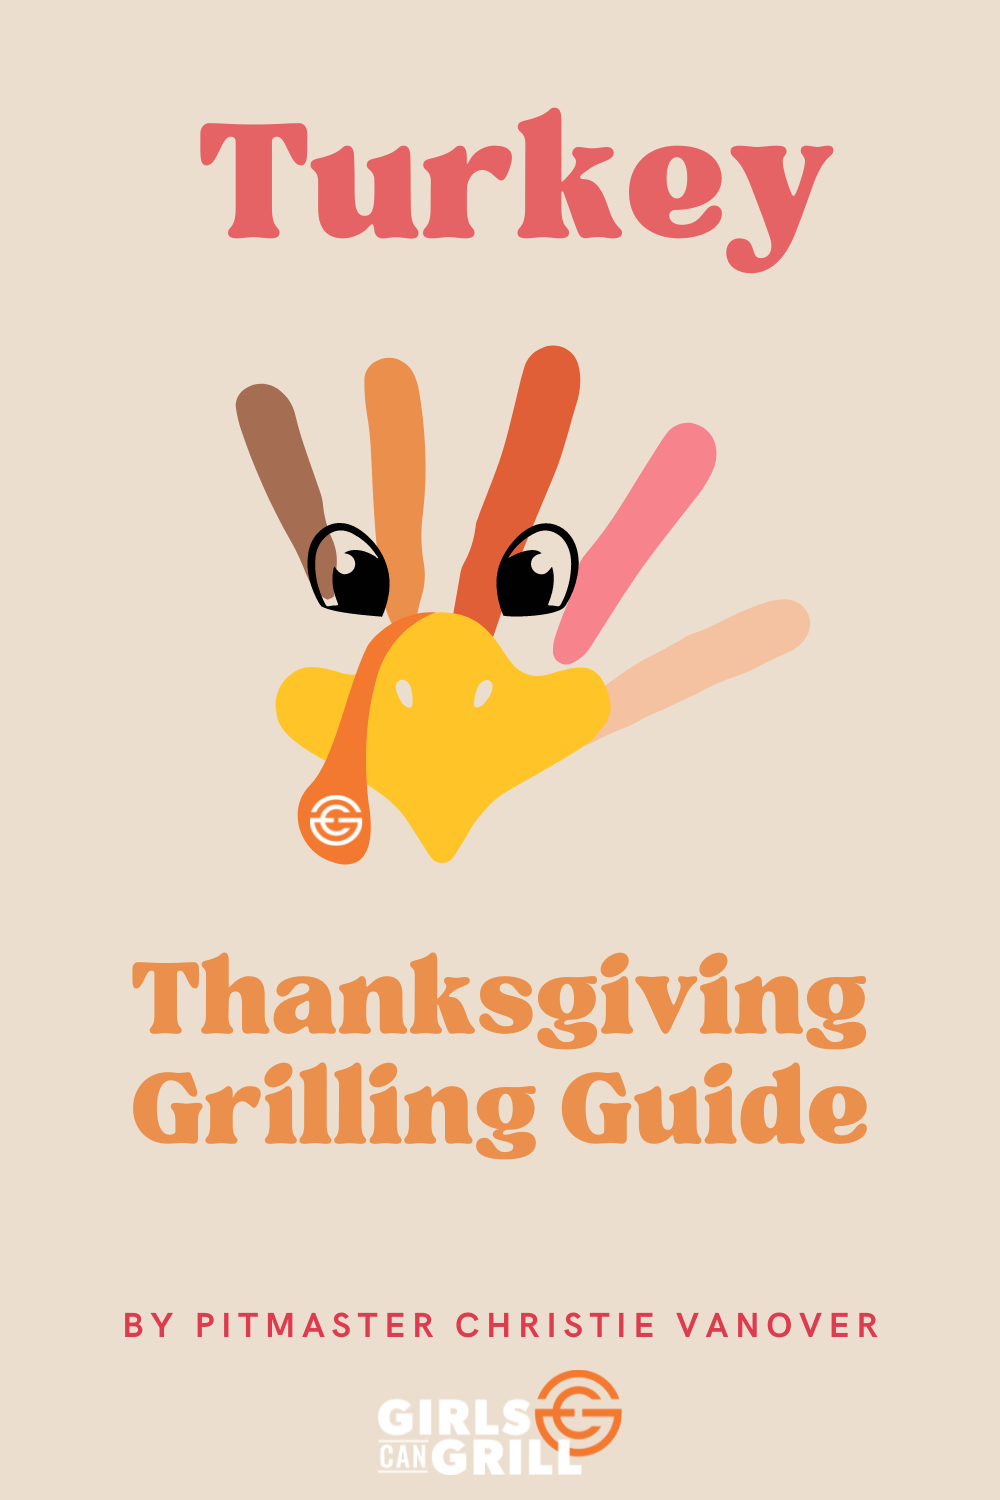 Thanksgiving Grilling Guide: Turkey